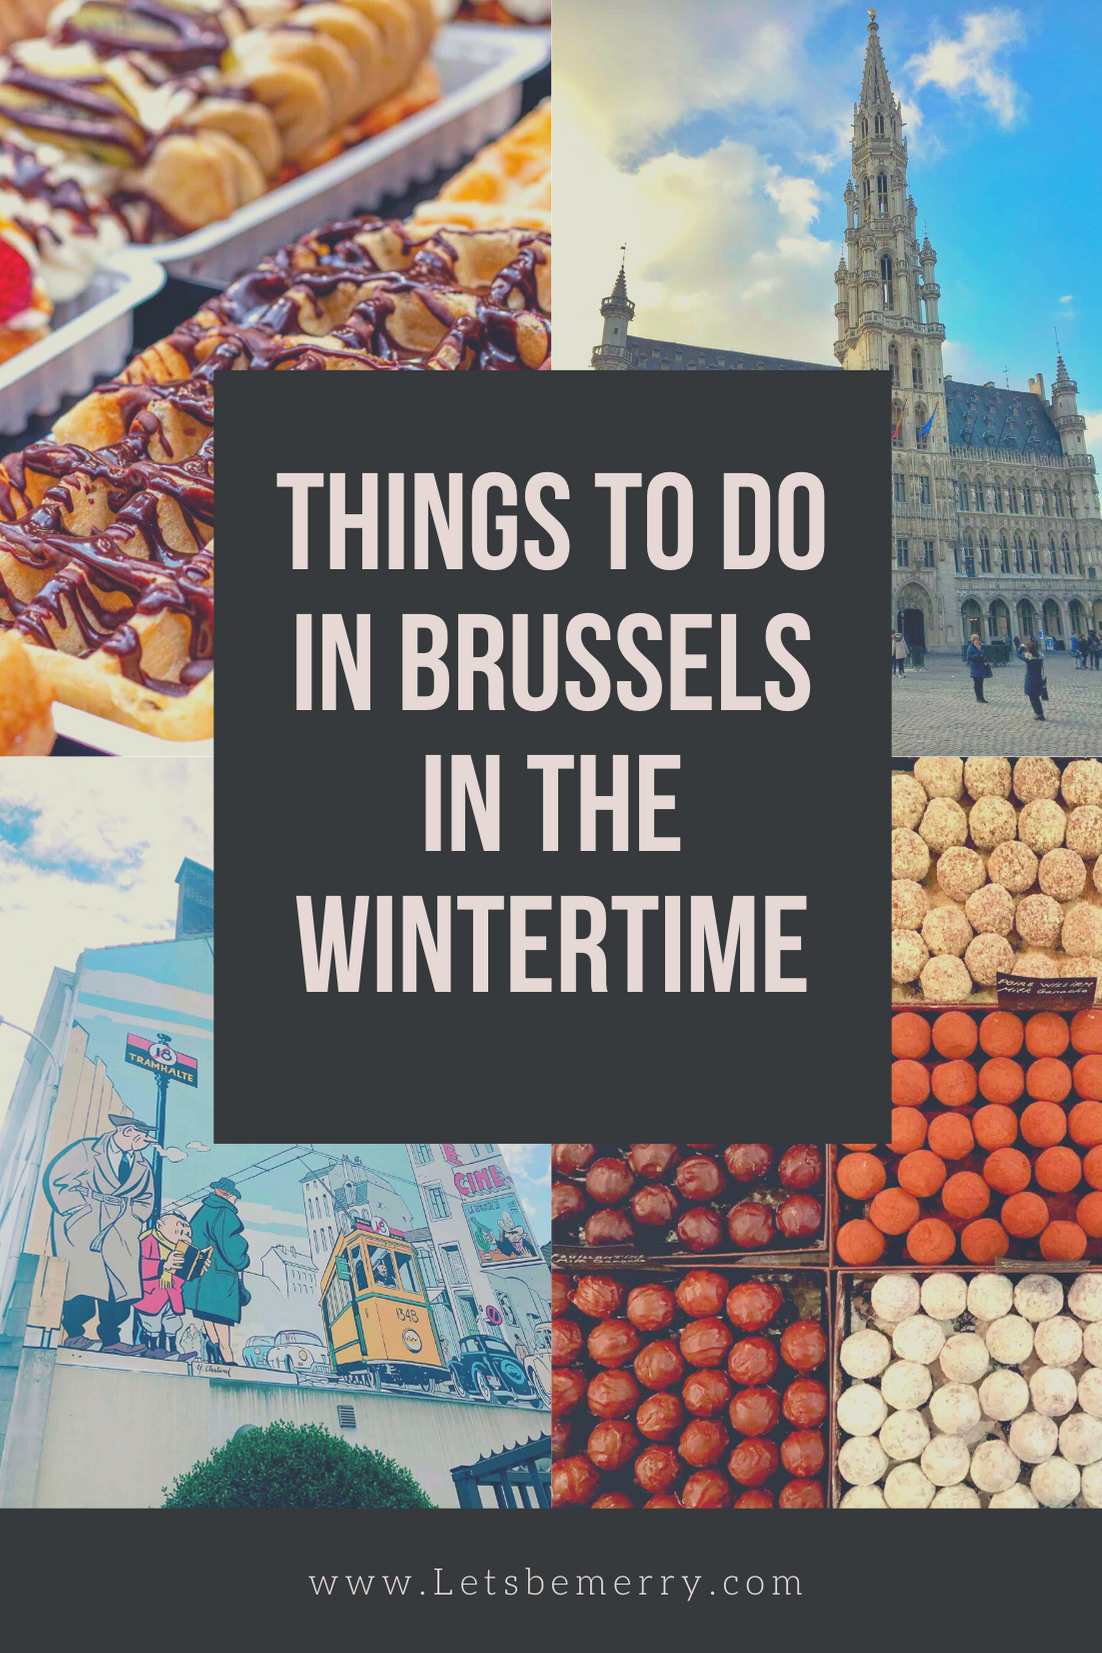 My 6 Favorite Things to Do in Brussels in the Wintertime